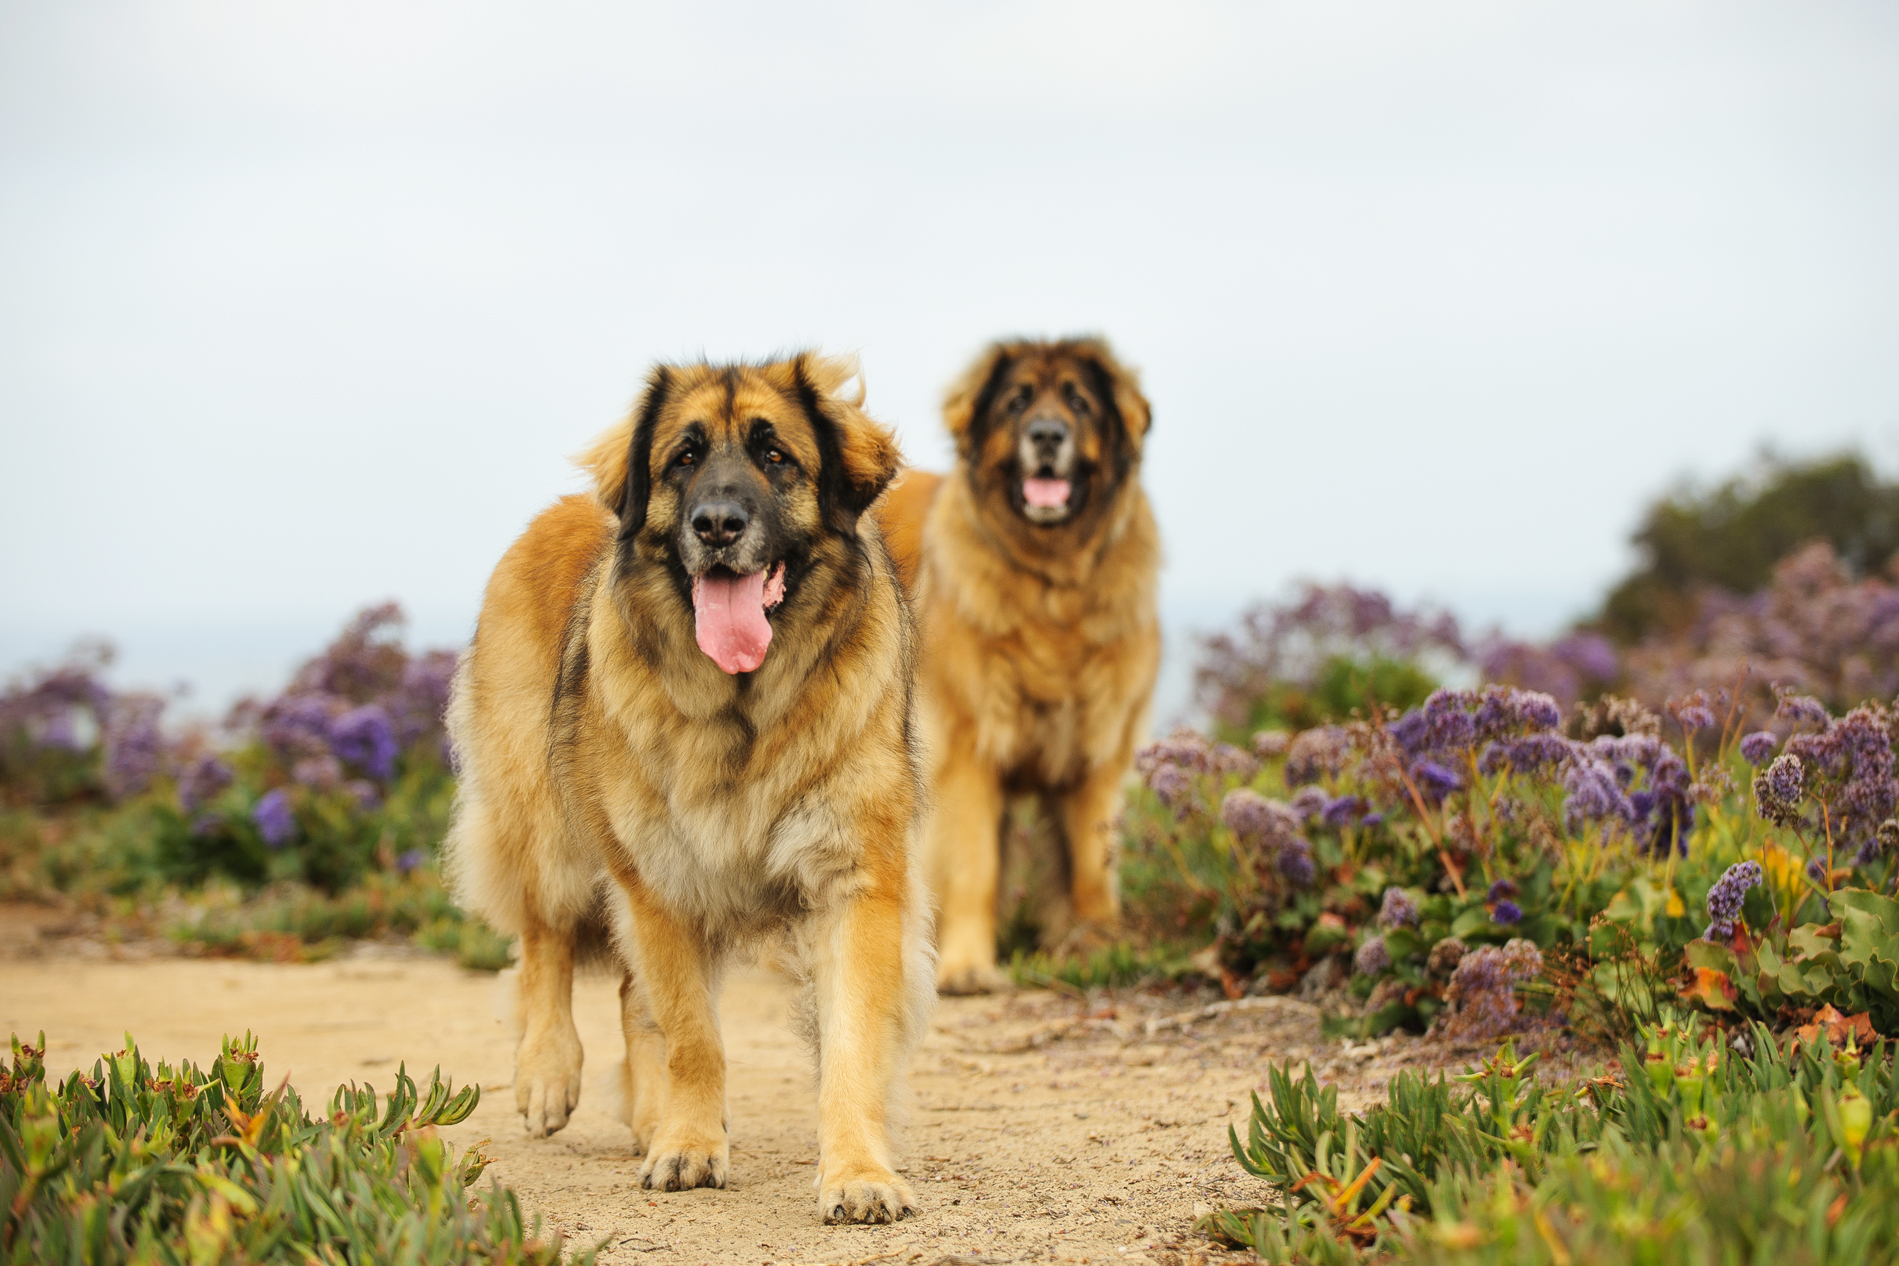 Two Leonberger dogs outdoor portrait standing in field